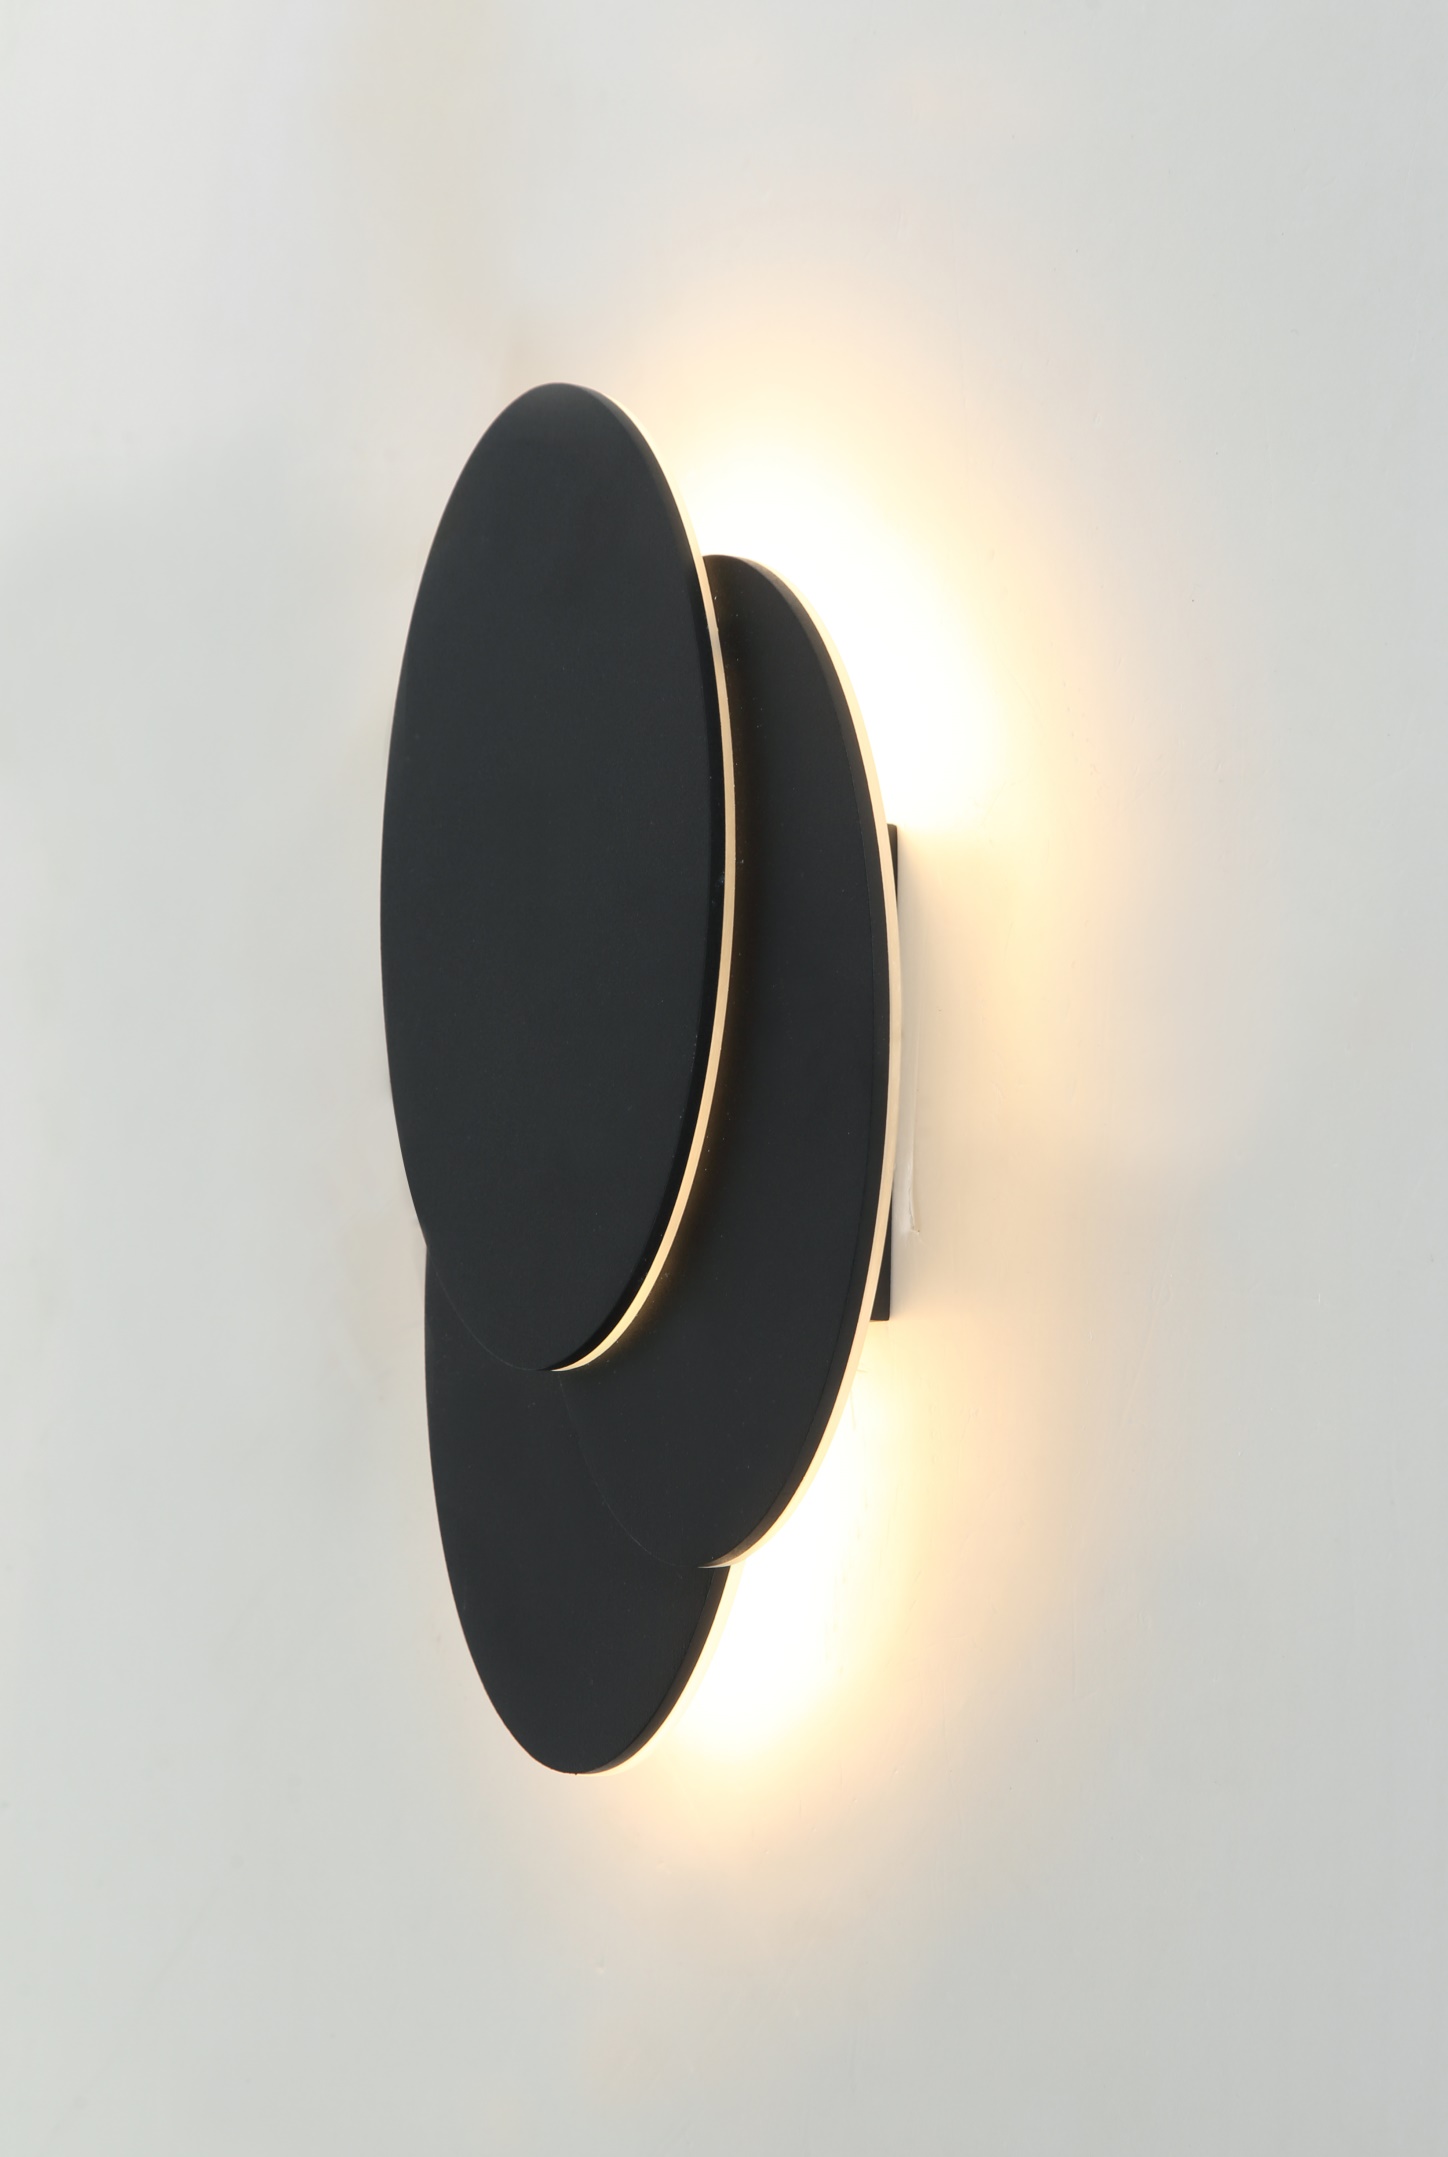 high-quality wall lamp 2c vendor for bedroom-1